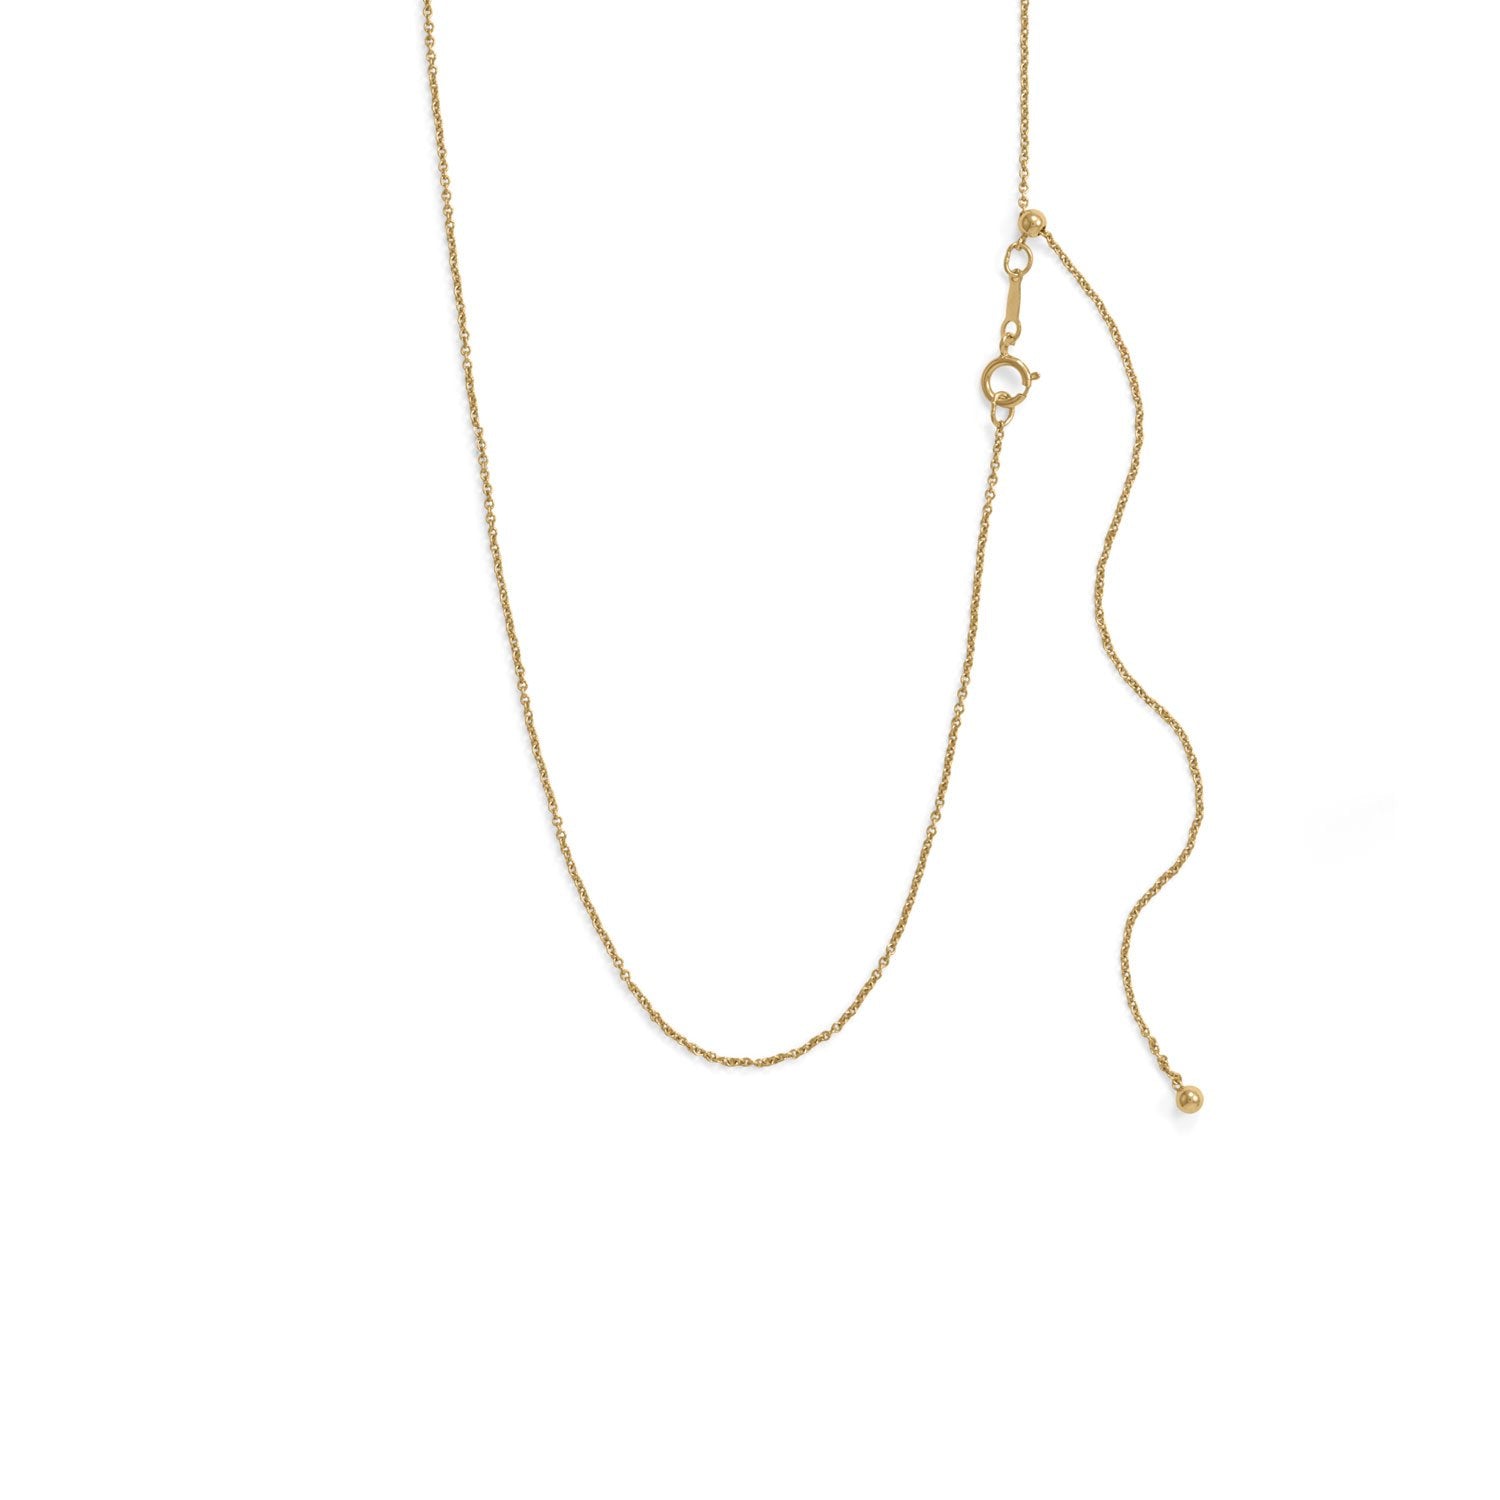 Adjustable 14/20 Gold-Filled Cable Chain - Joyeria Lady